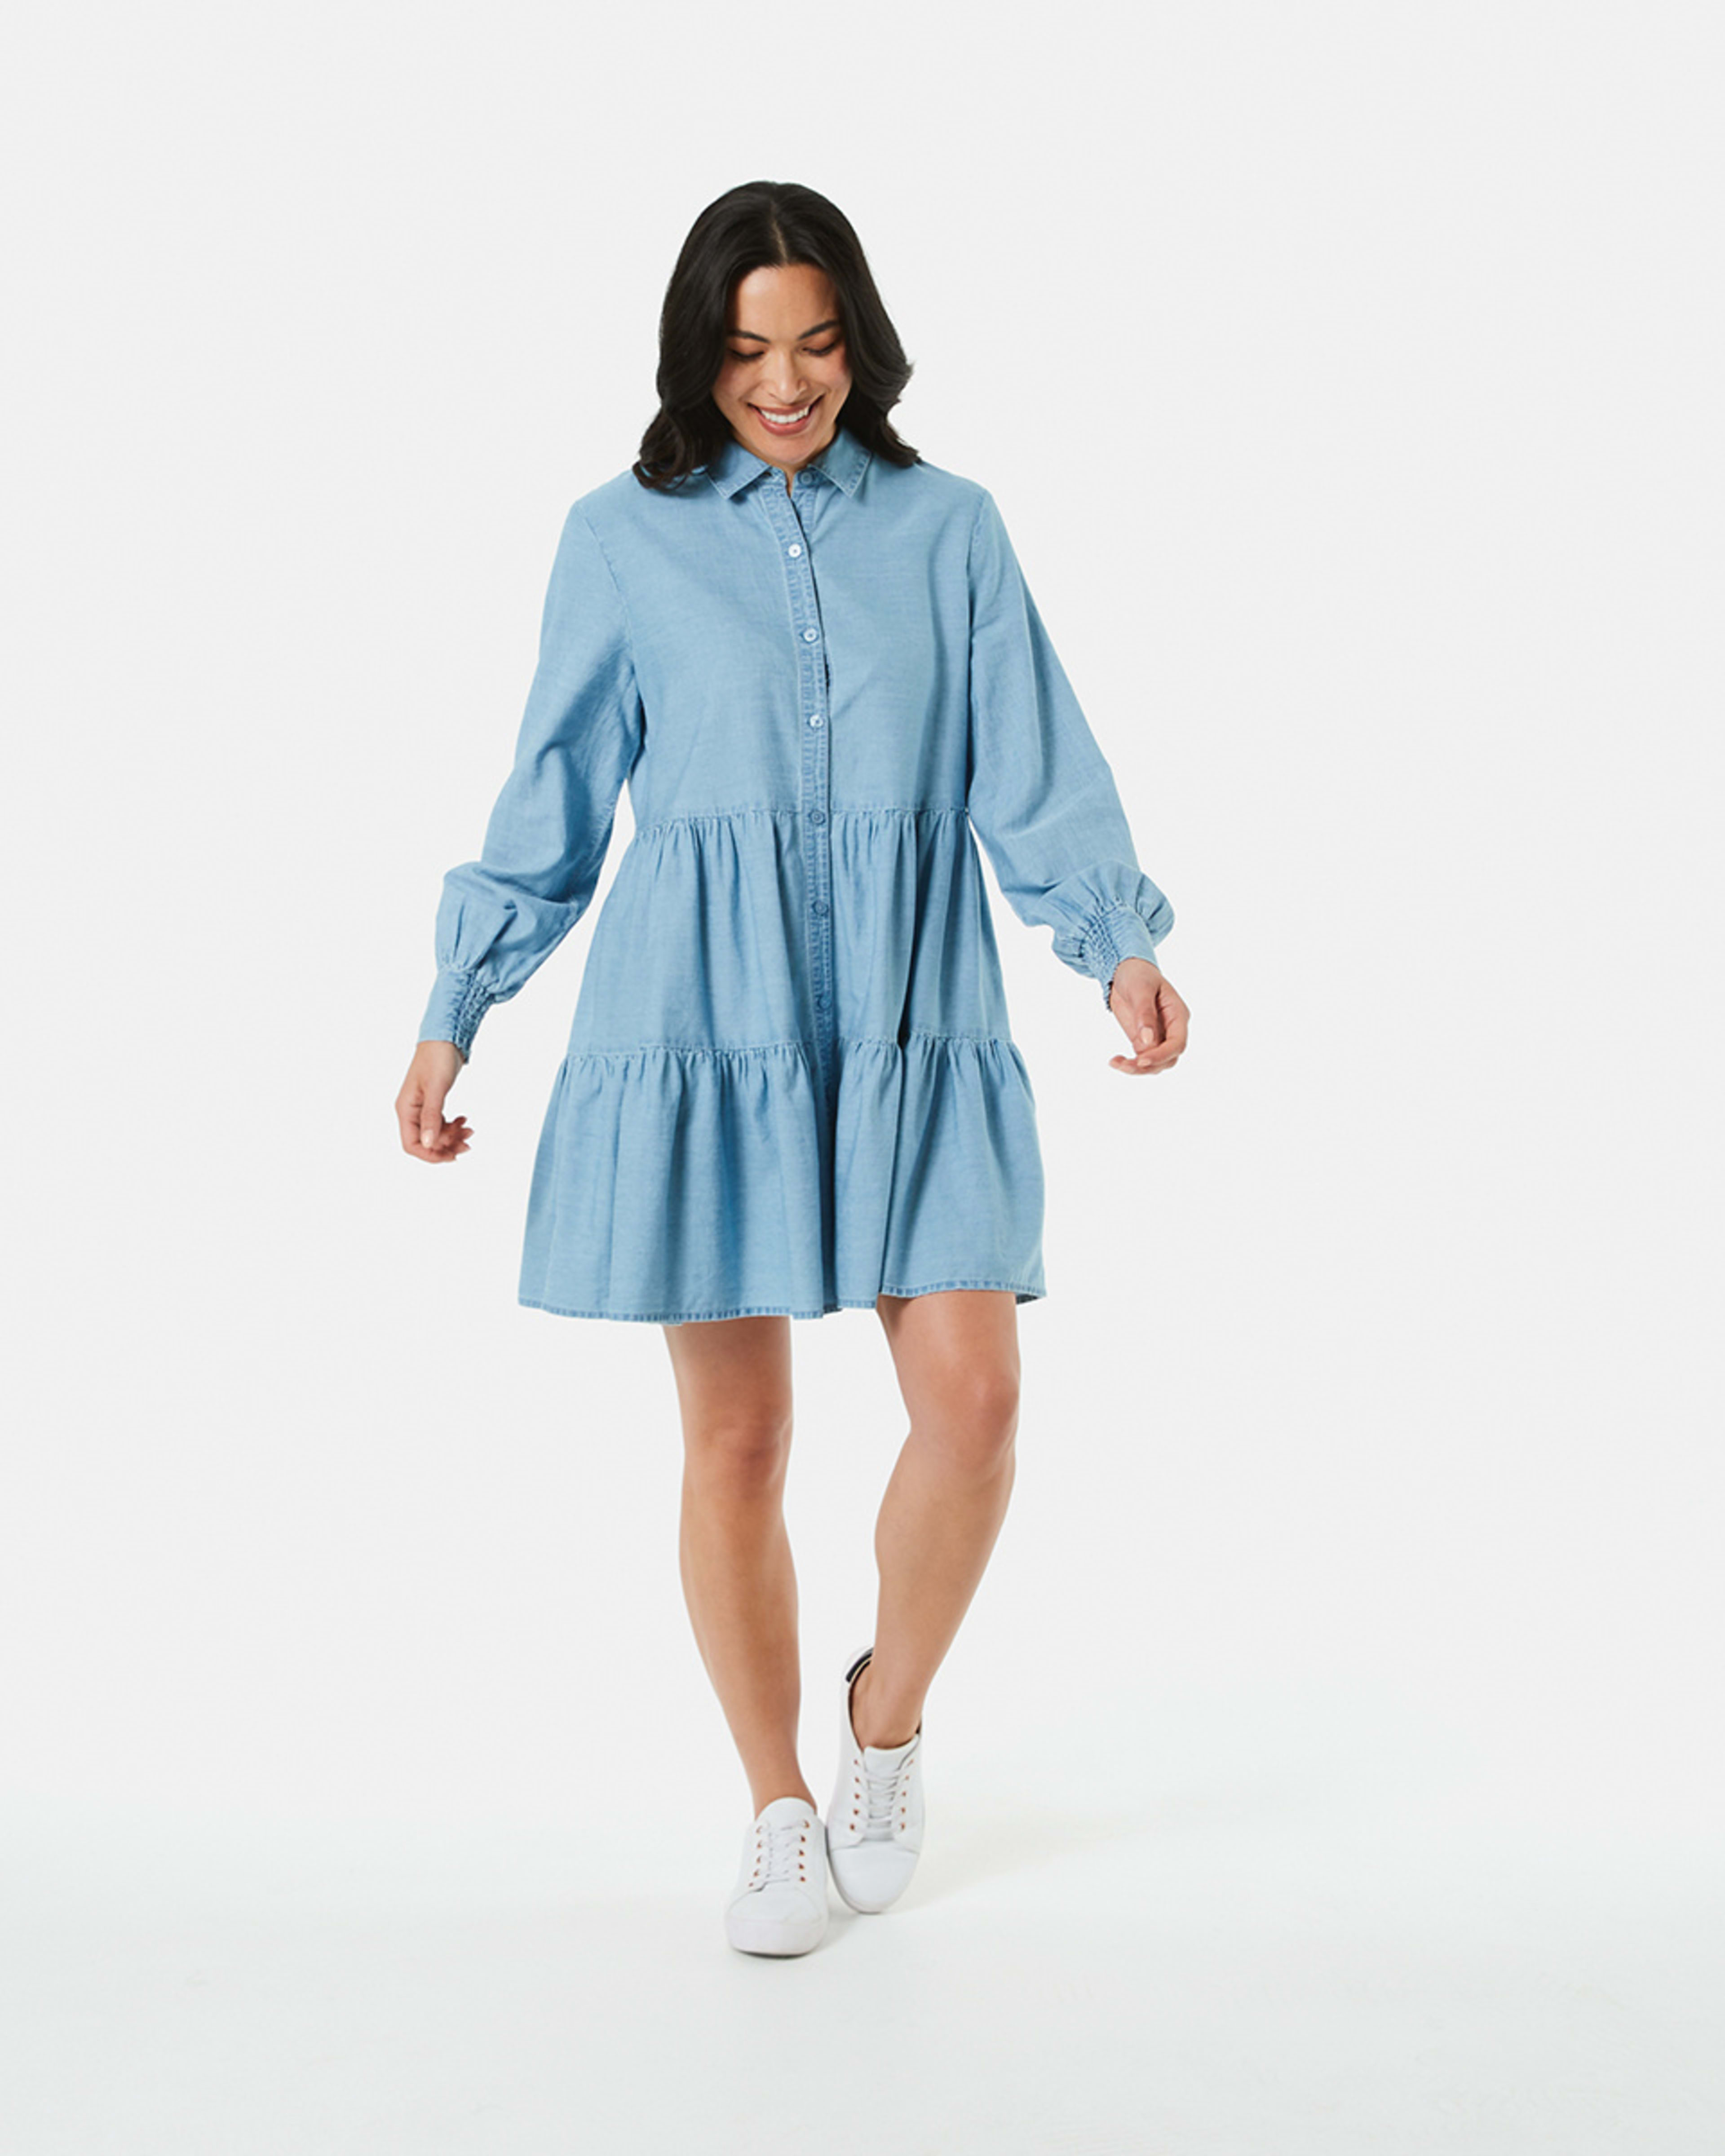 Long Sleeve Collared Neck Tiered Dress - Kmart